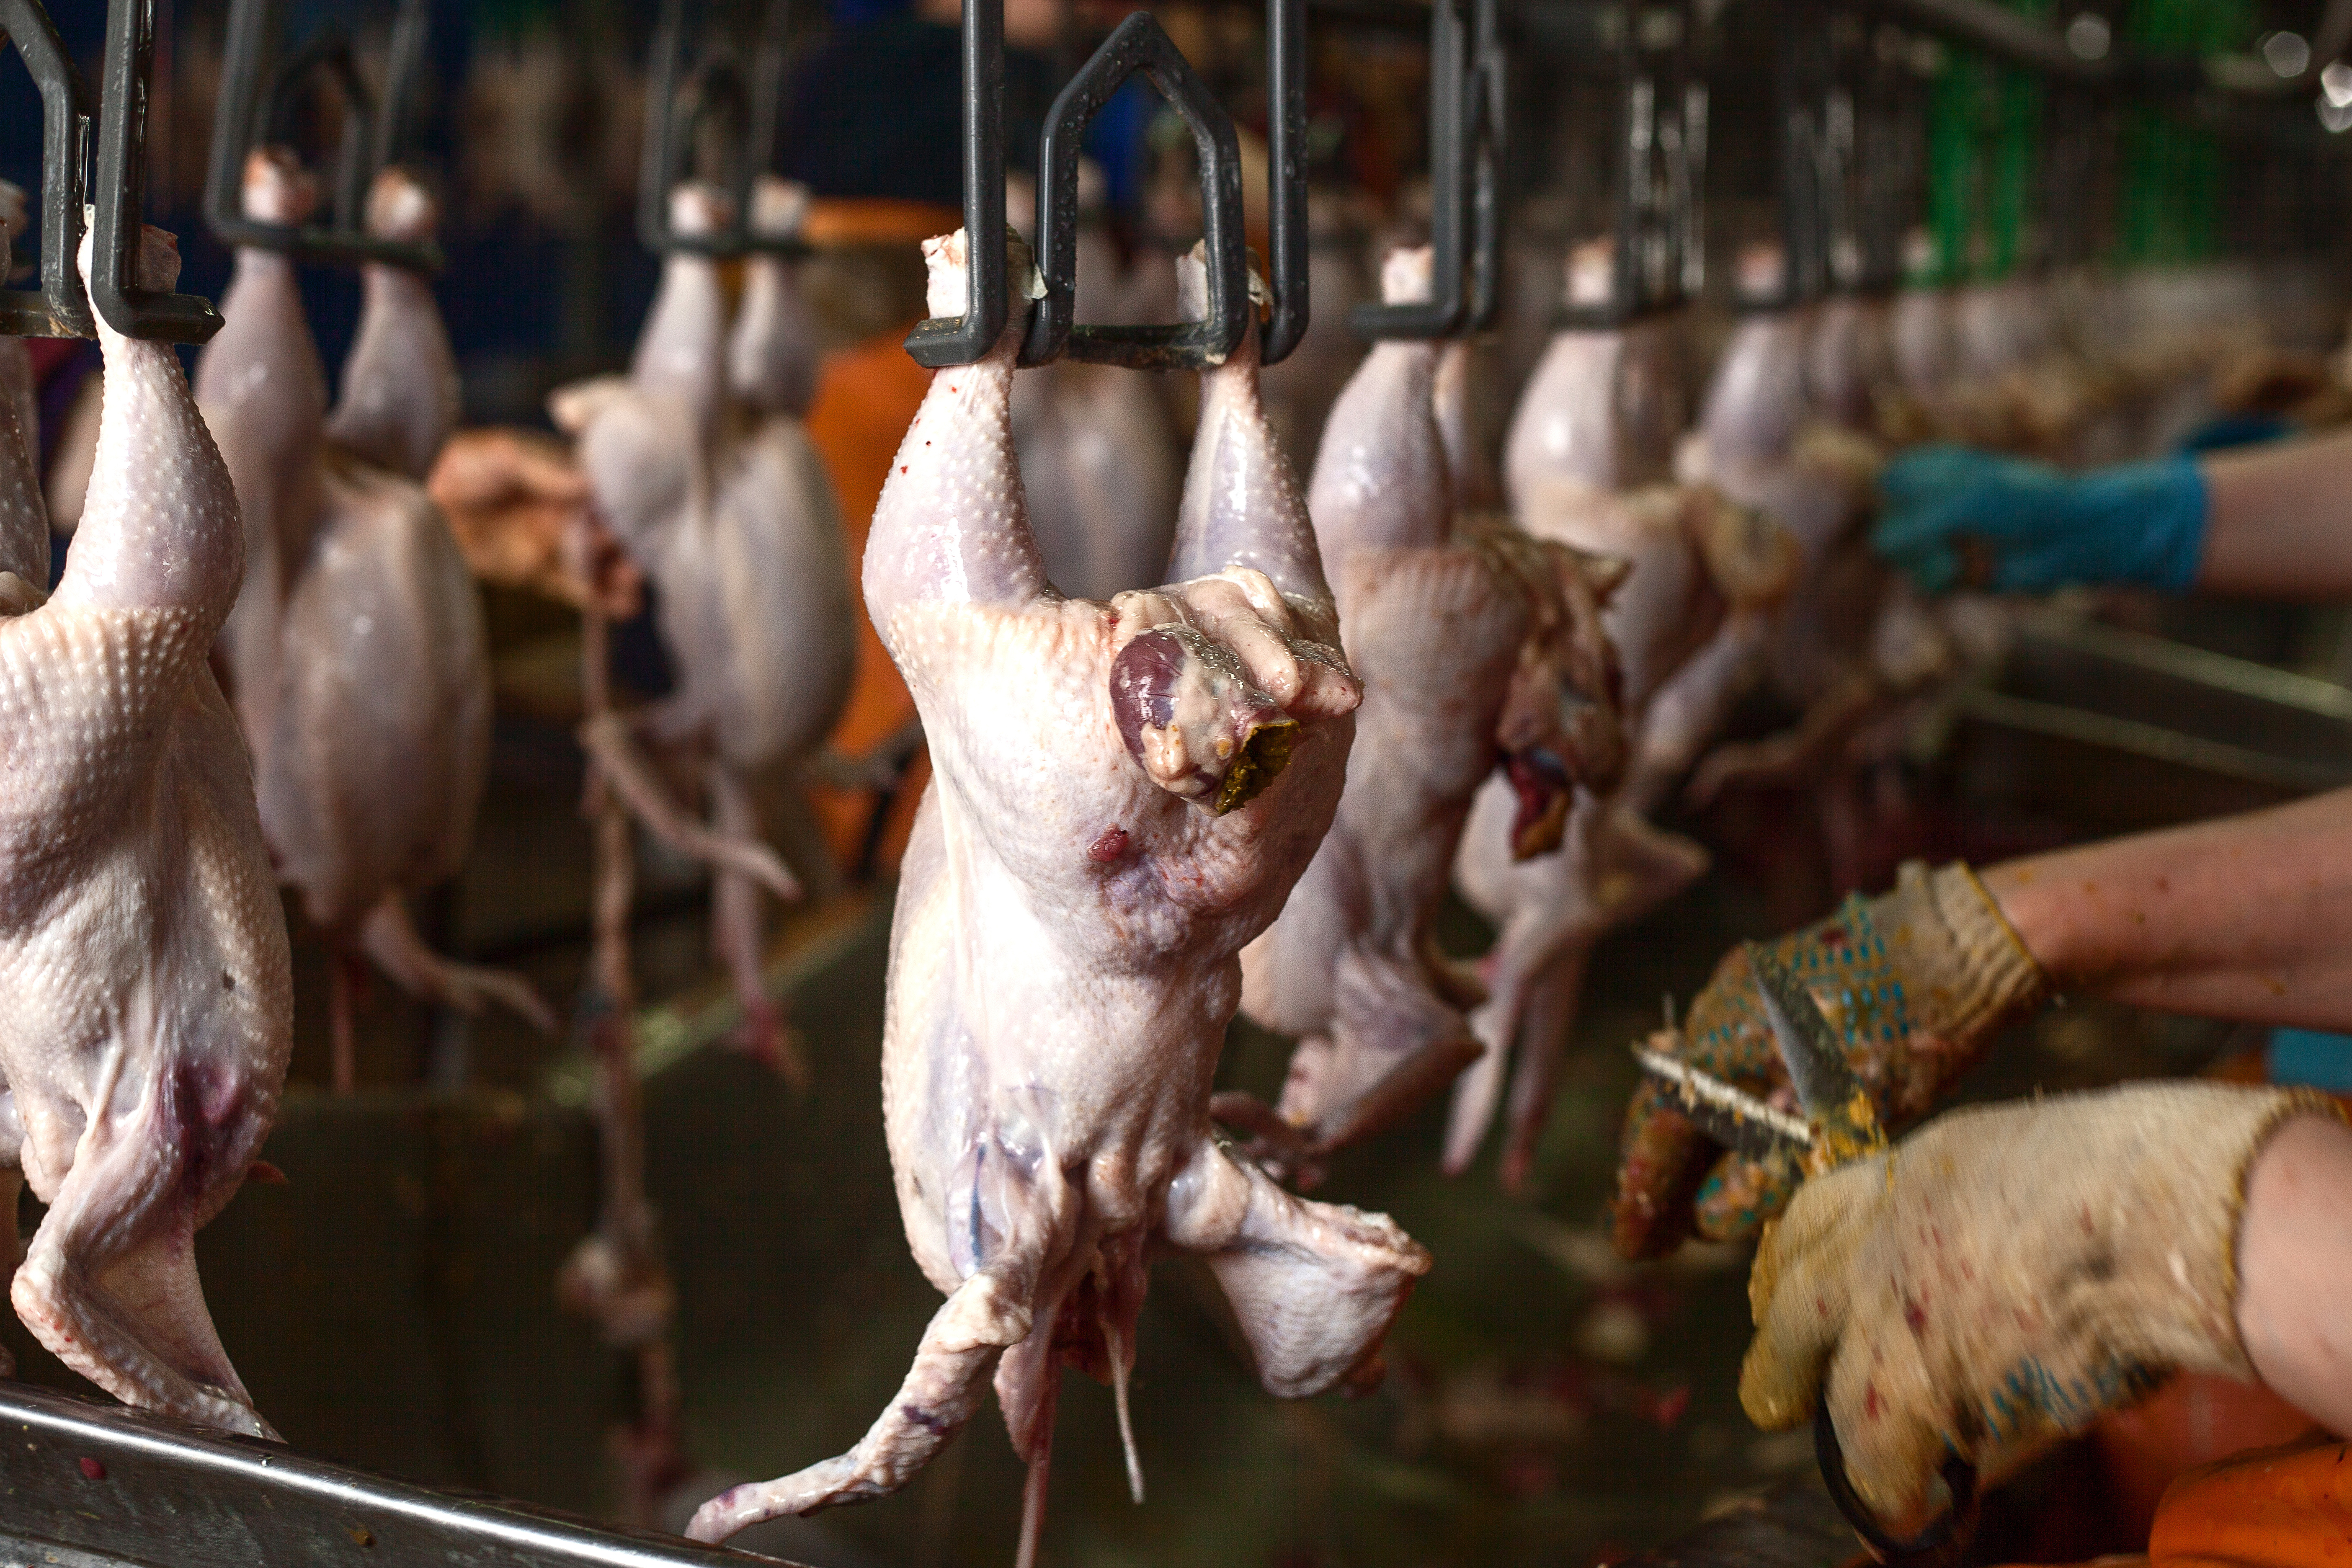 workers trimming chicken carcasses on a conveyer belt